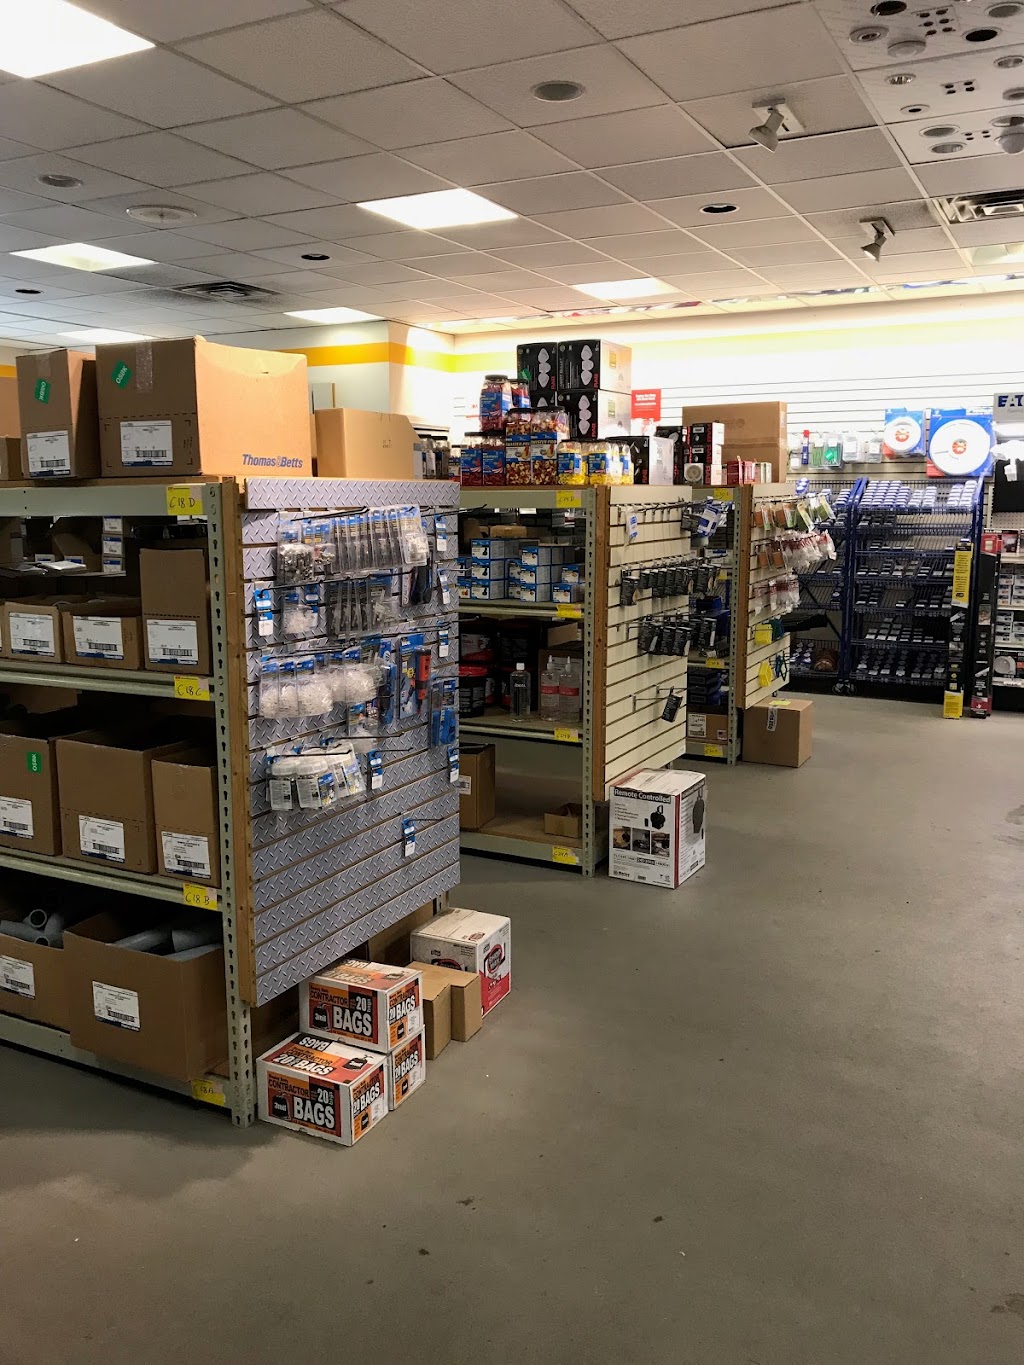 Electrical Wholesalers Inc. | 1383 Boston Post Rd, Old Saybrook, CT 06475 | Phone: (860) 388-3001